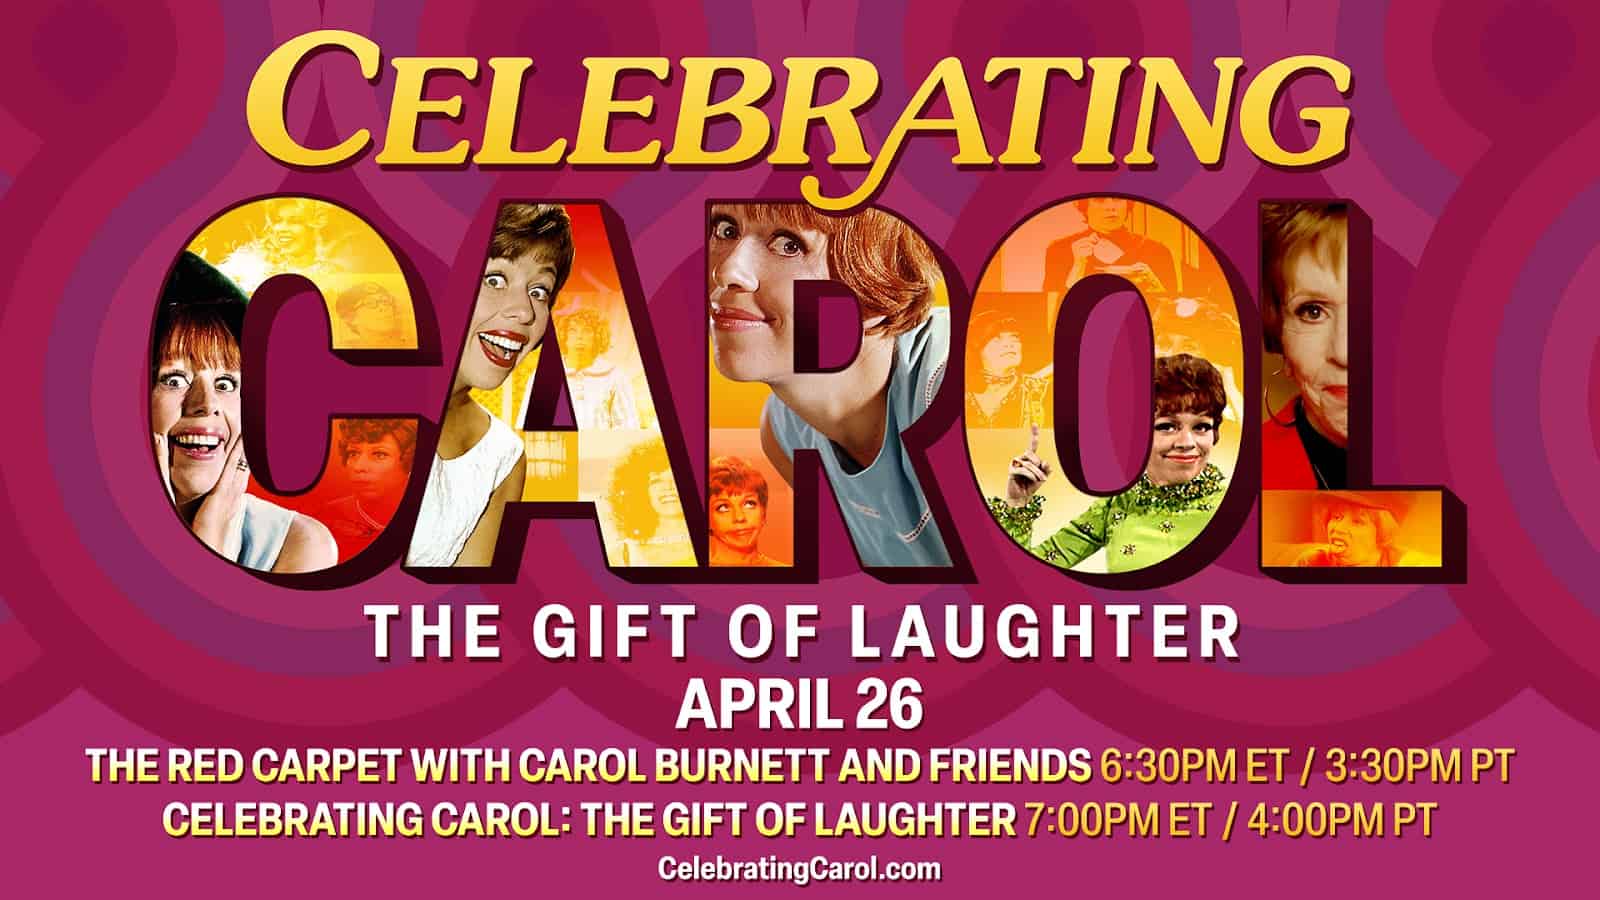 Shout! Factory TV Honors Carol Burnett with Exclusive Streaming Event. Did you watch? 26